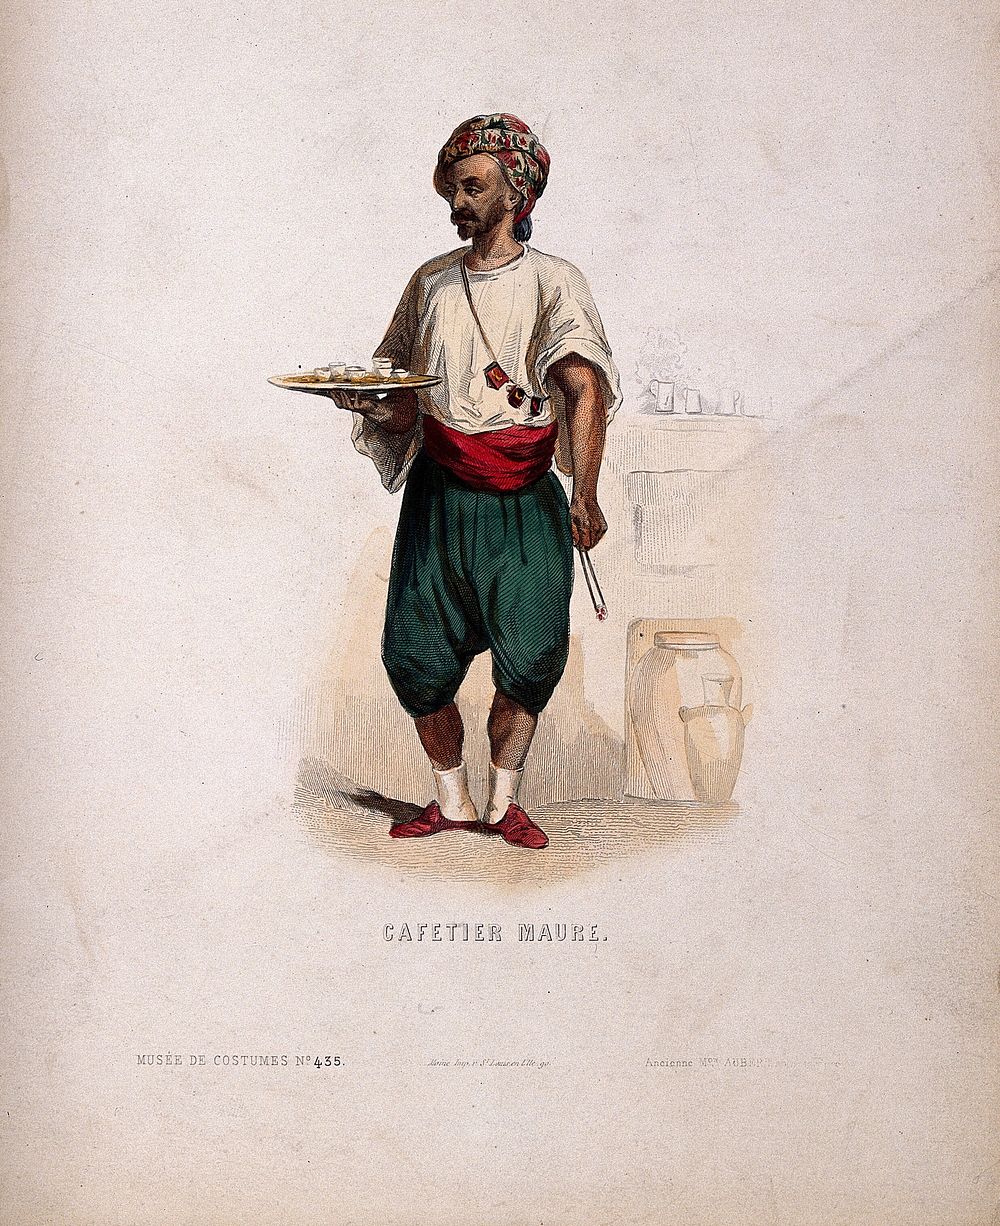 A Turkish coffee vendor with a tray of coffee cups. Coloured engraving, c. 1860.